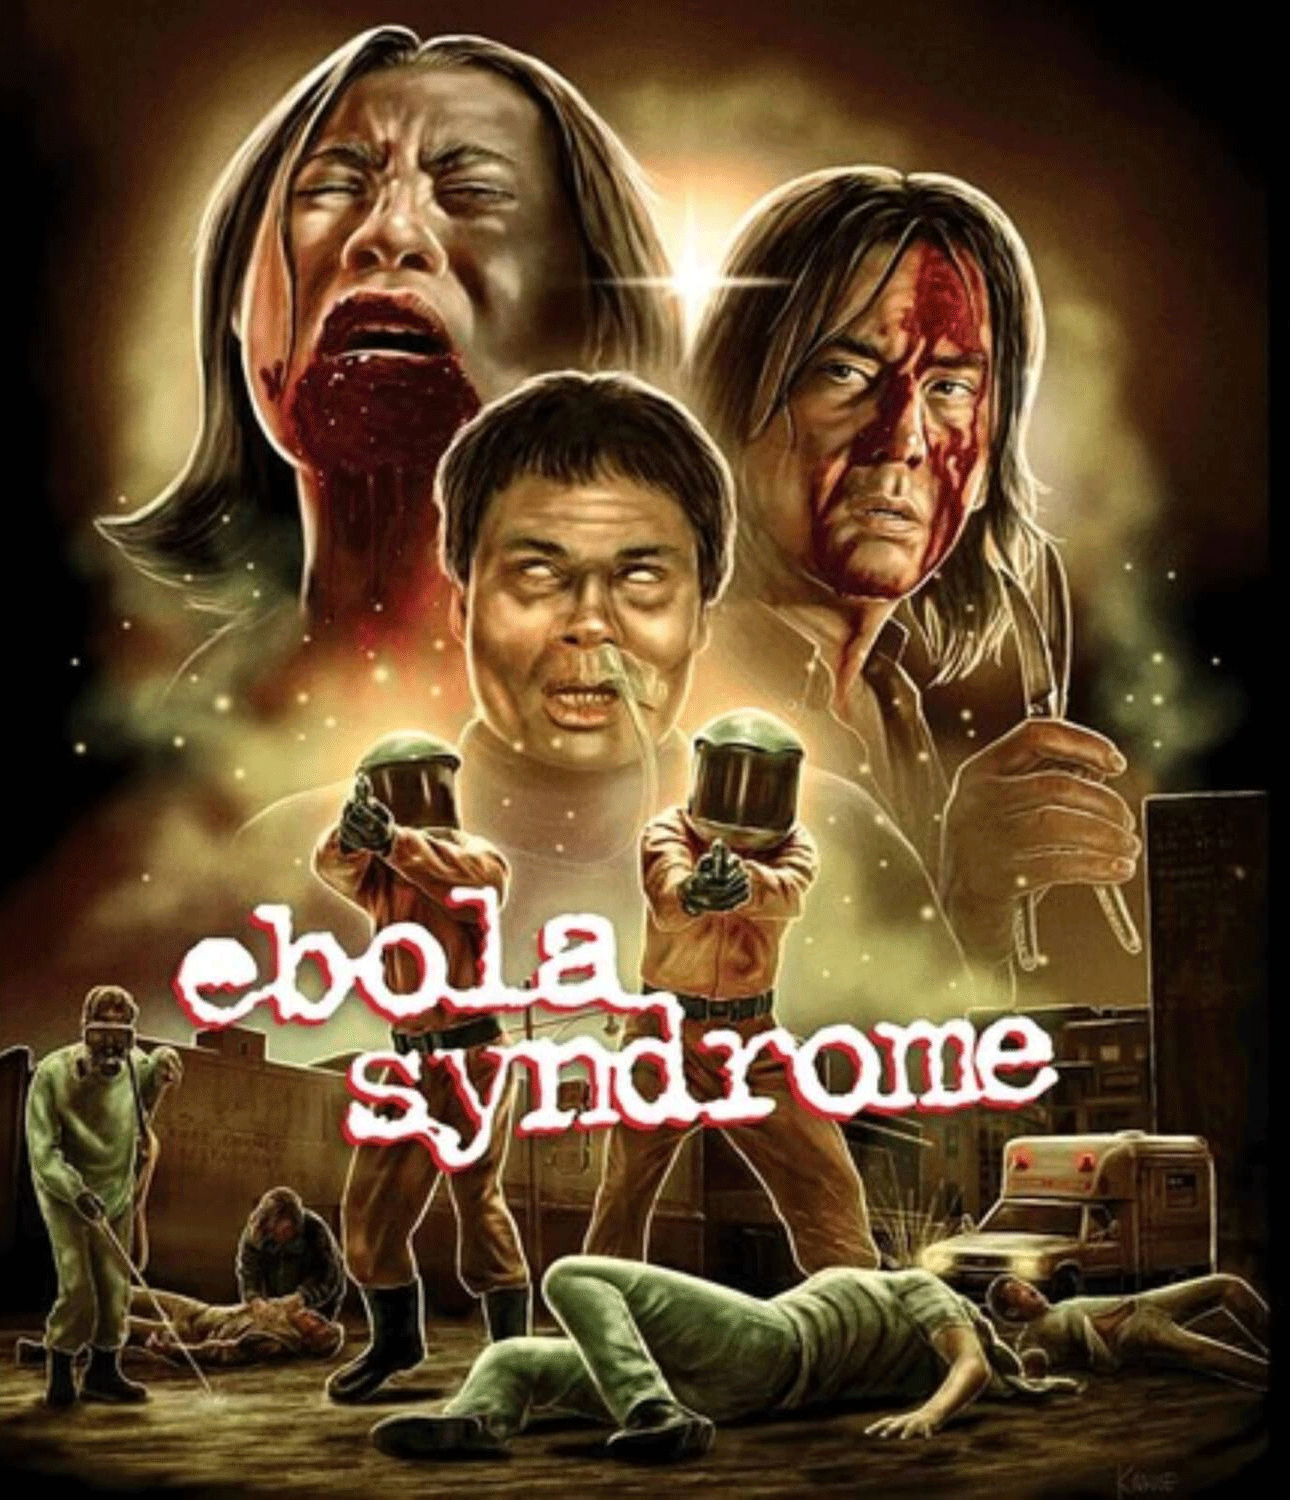 EBOLA SYNDROME 4K ULTRA HD / BLU-RAY COMBO (Limited Edition)